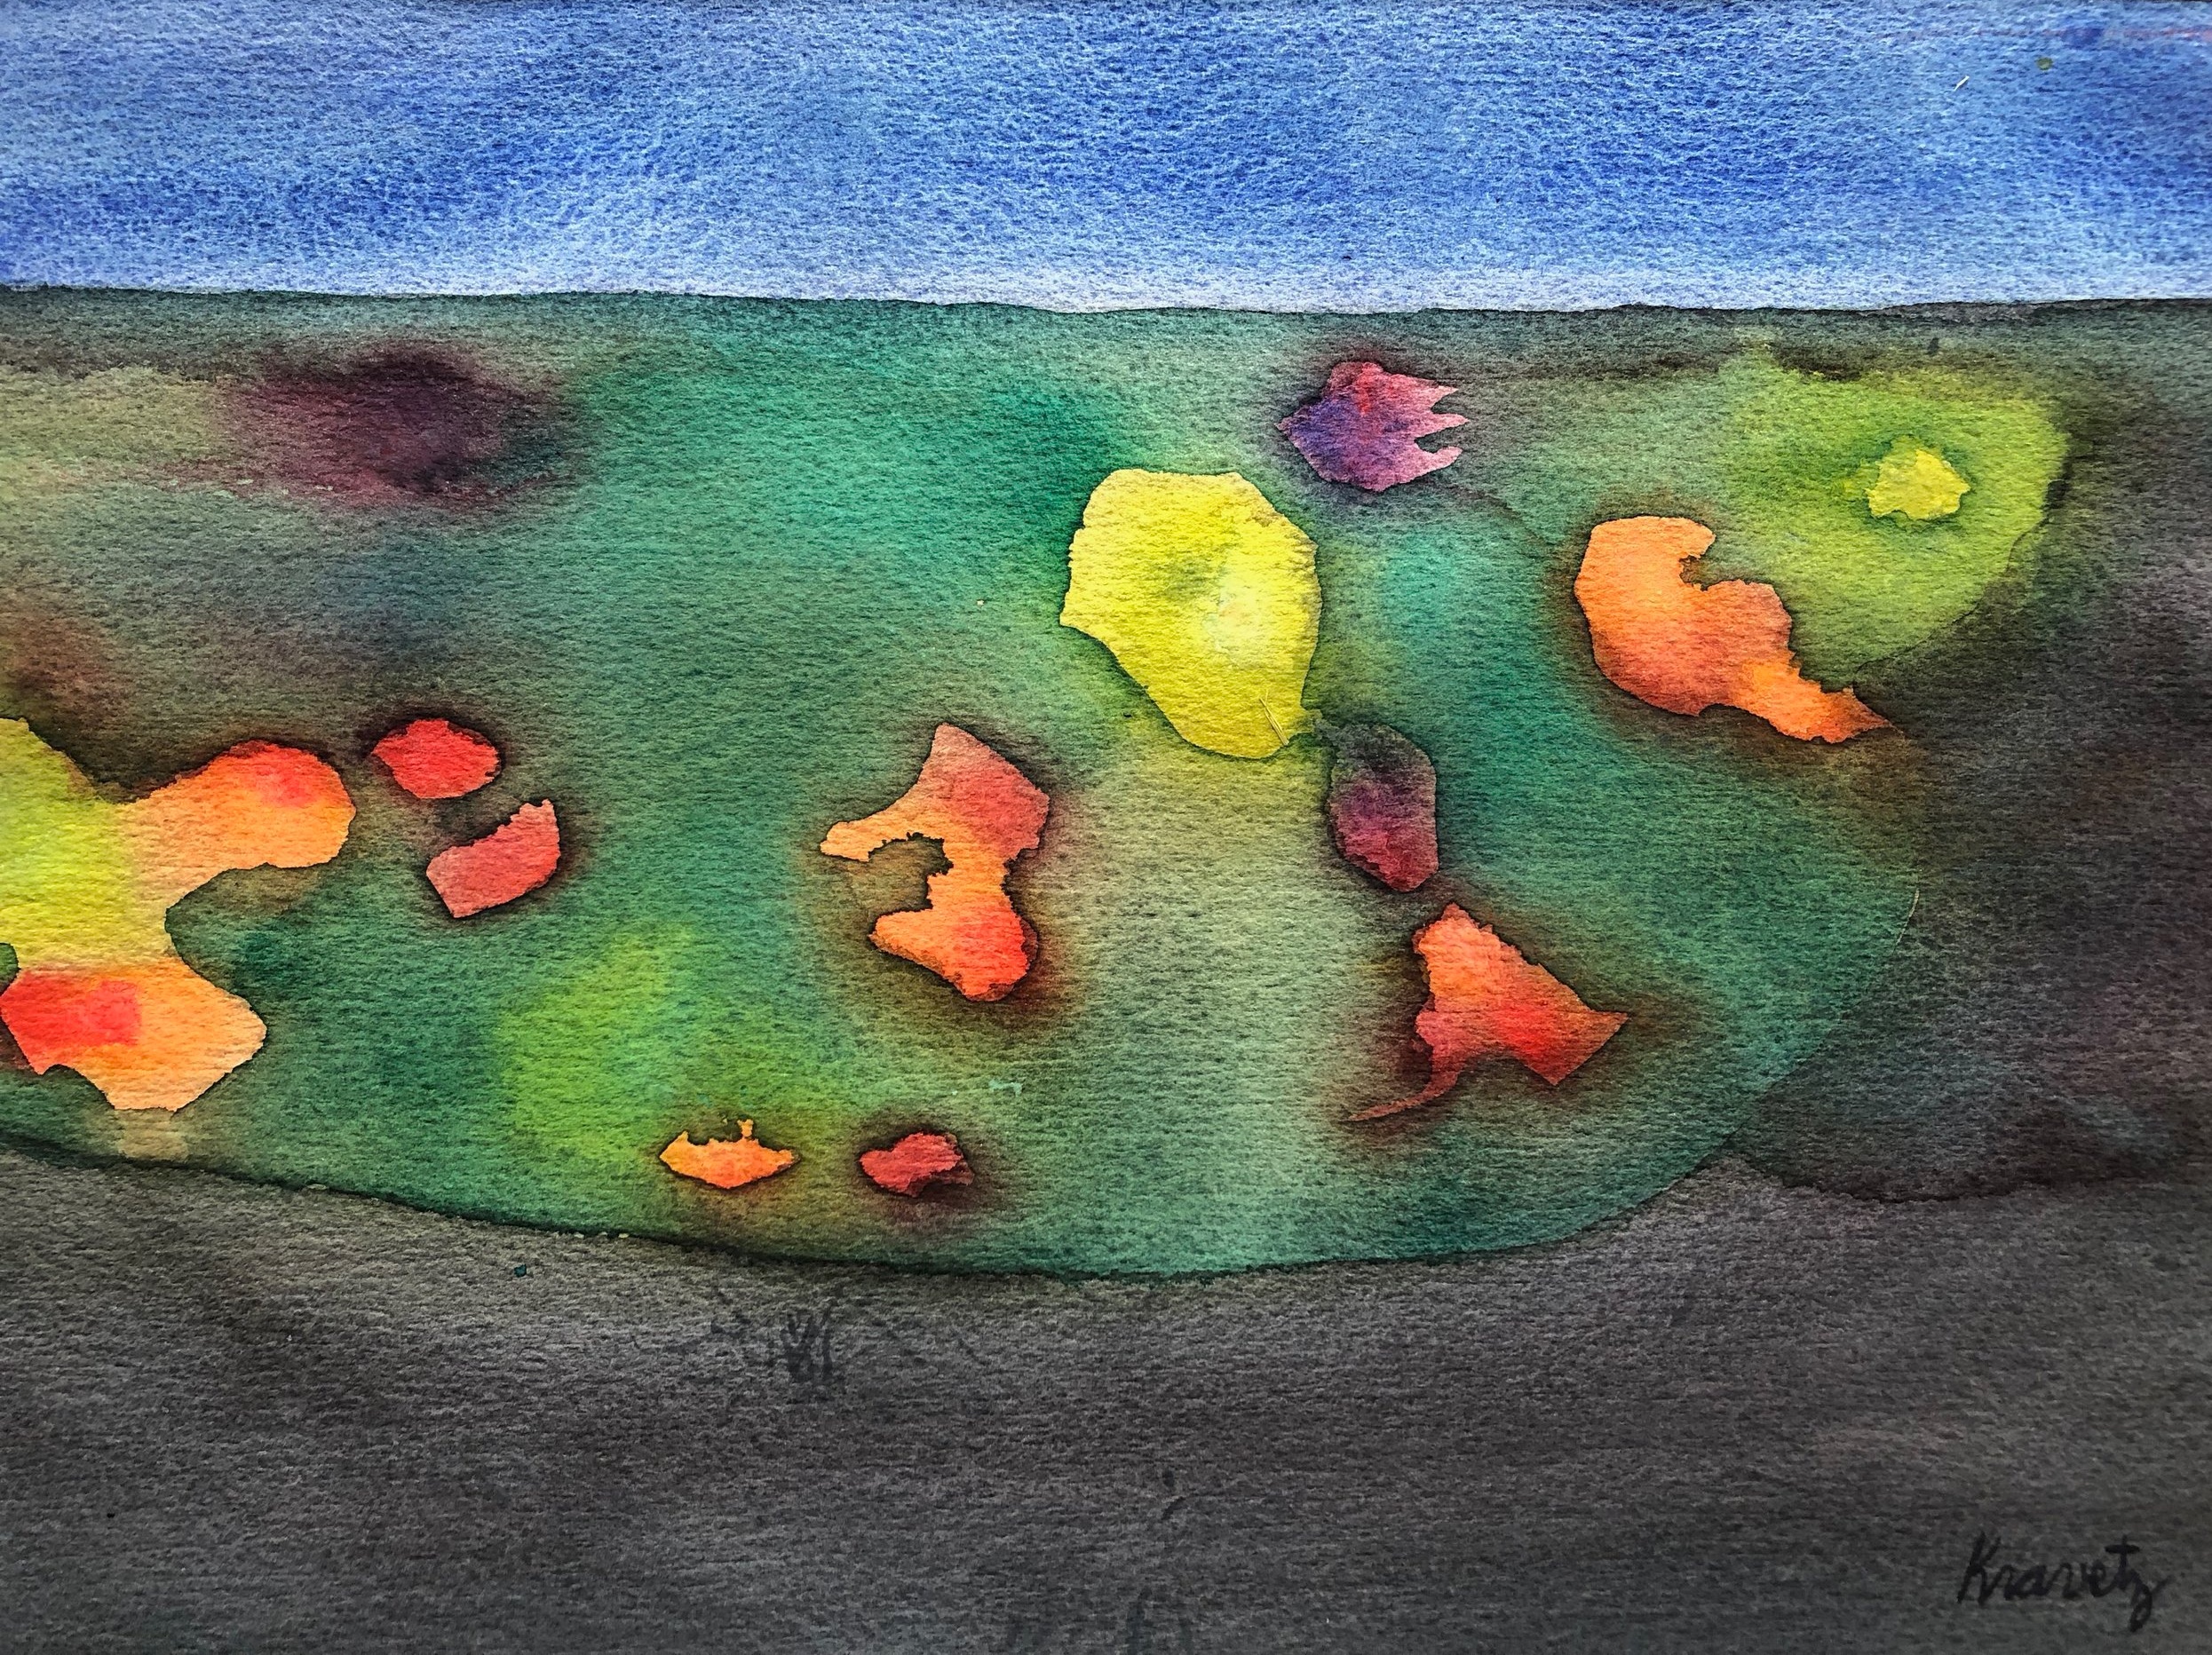 Chain of Islands, 1983, Watercolor, 16x20 inches with mat